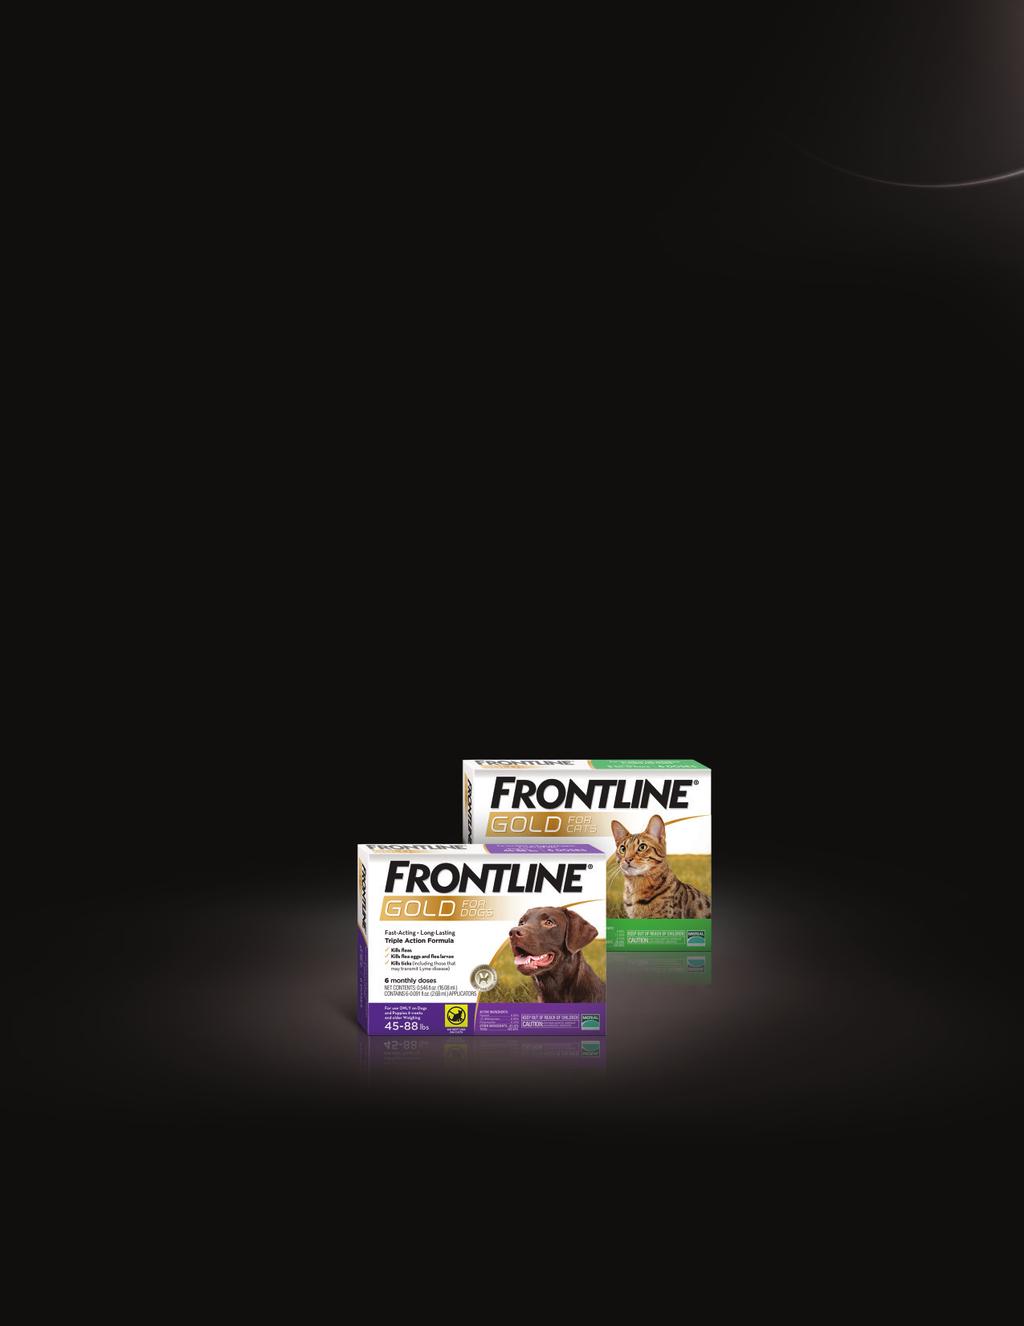 THE FRONTLINE BRAND PRODUCTS WITH THE GOLDEN TOUCH.